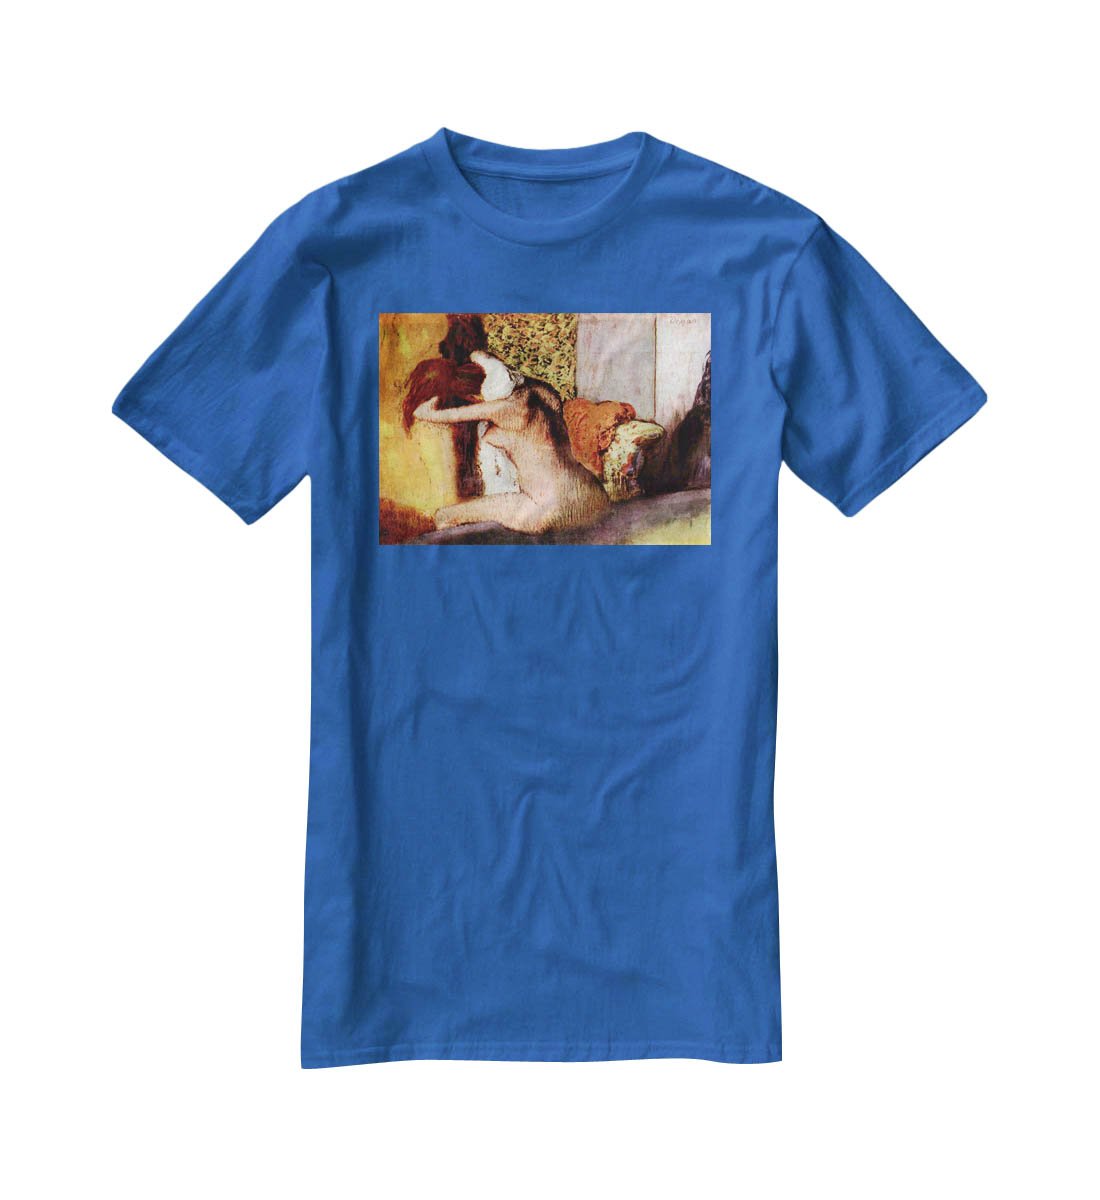 After bathing 2 by Degas T-Shirt - Canvas Art Rocks - 2